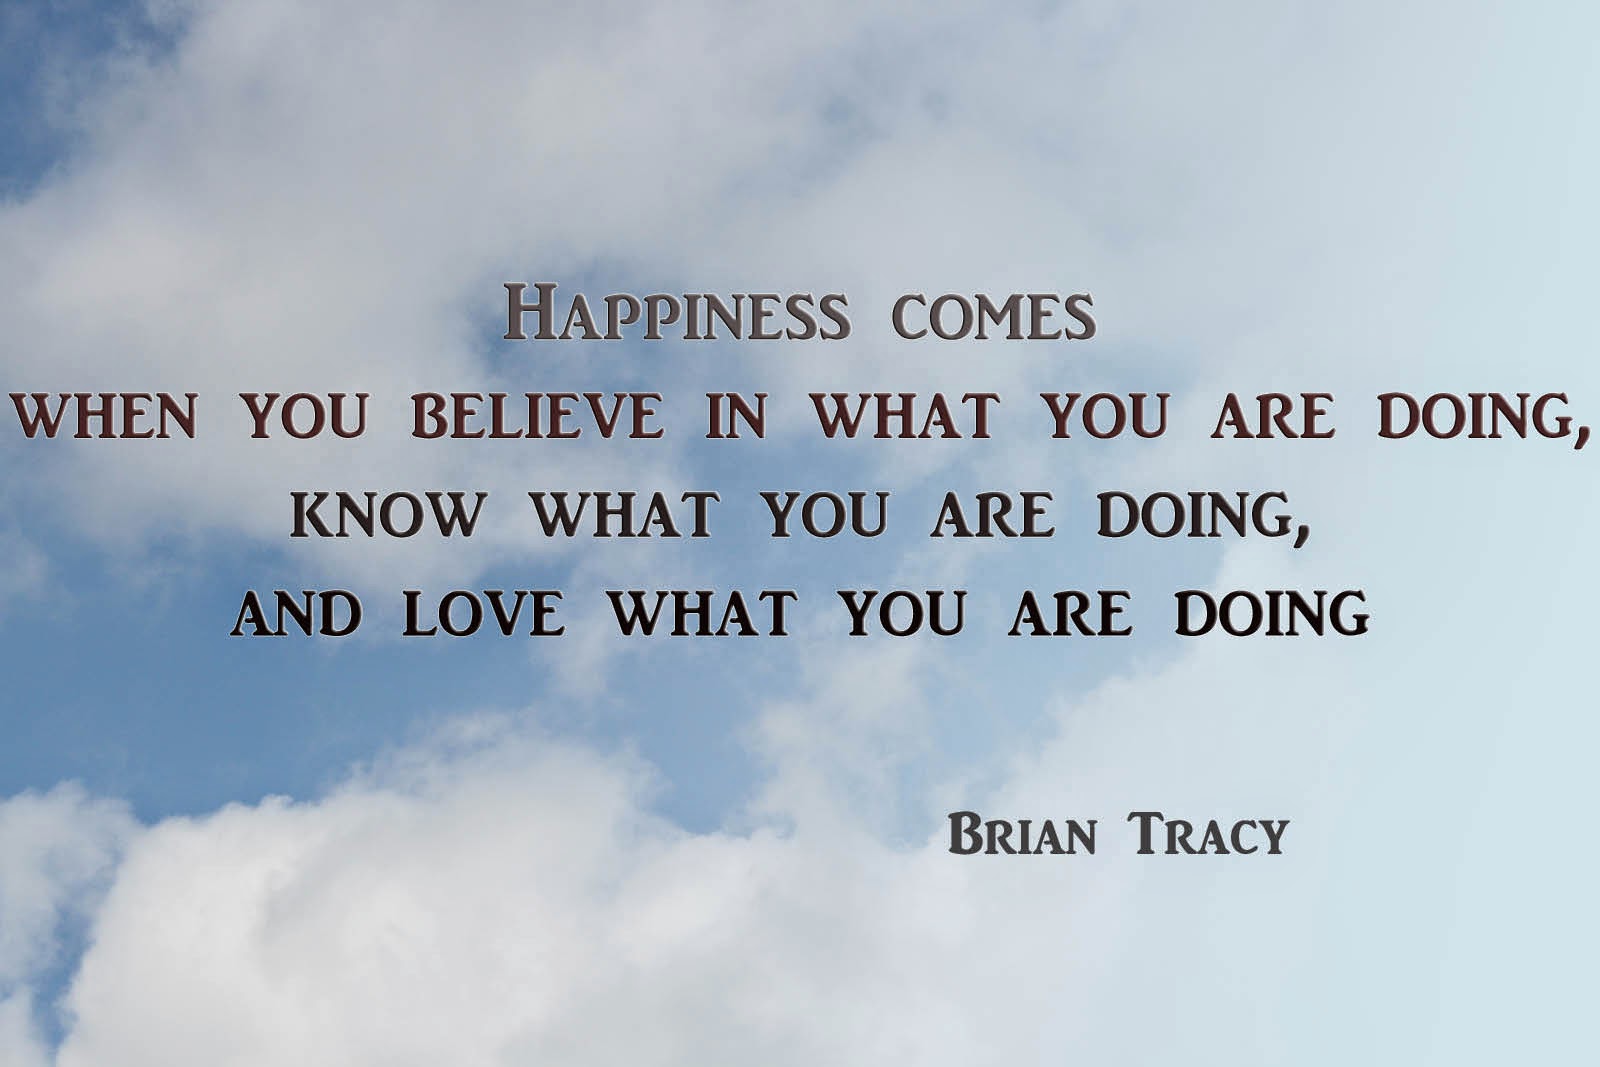 When it come s to you. Happiness comes. Believe Happiness. Doing what you like is Freedom. When it comes to you.